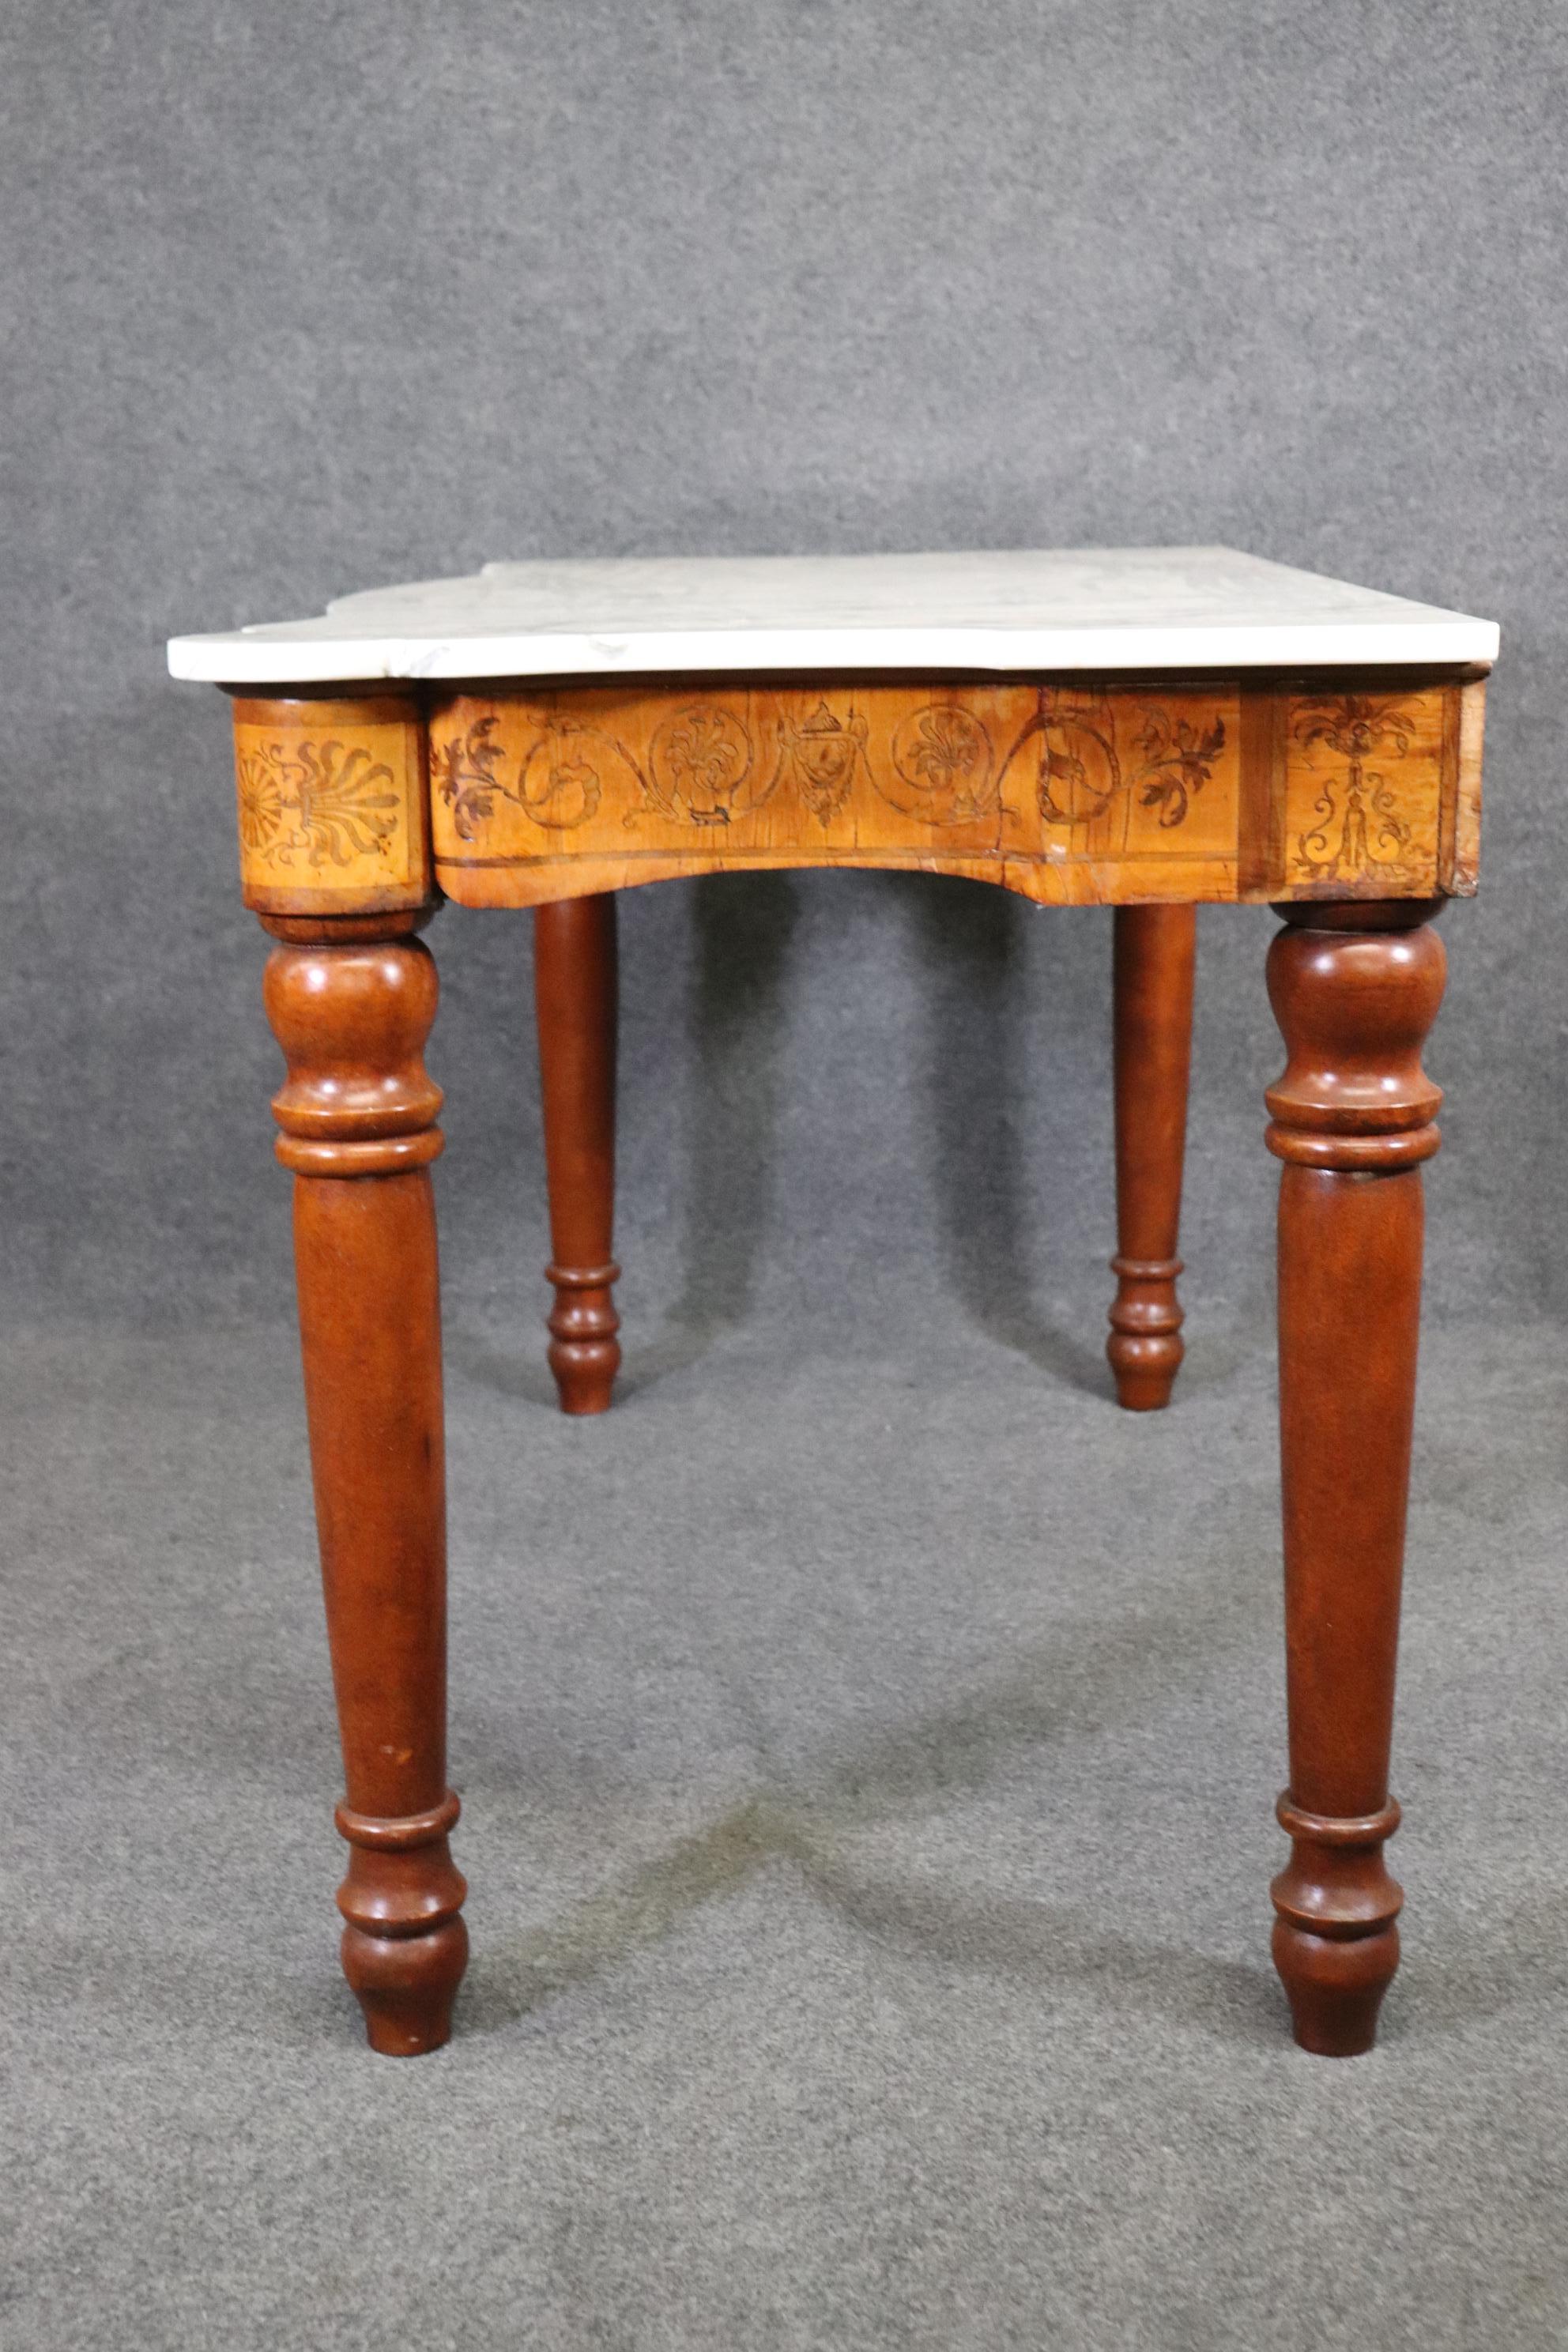 French Provincial Rare Marble Top Italian Inlaid Satinwood Pasta Ravioli Pastry Making Table